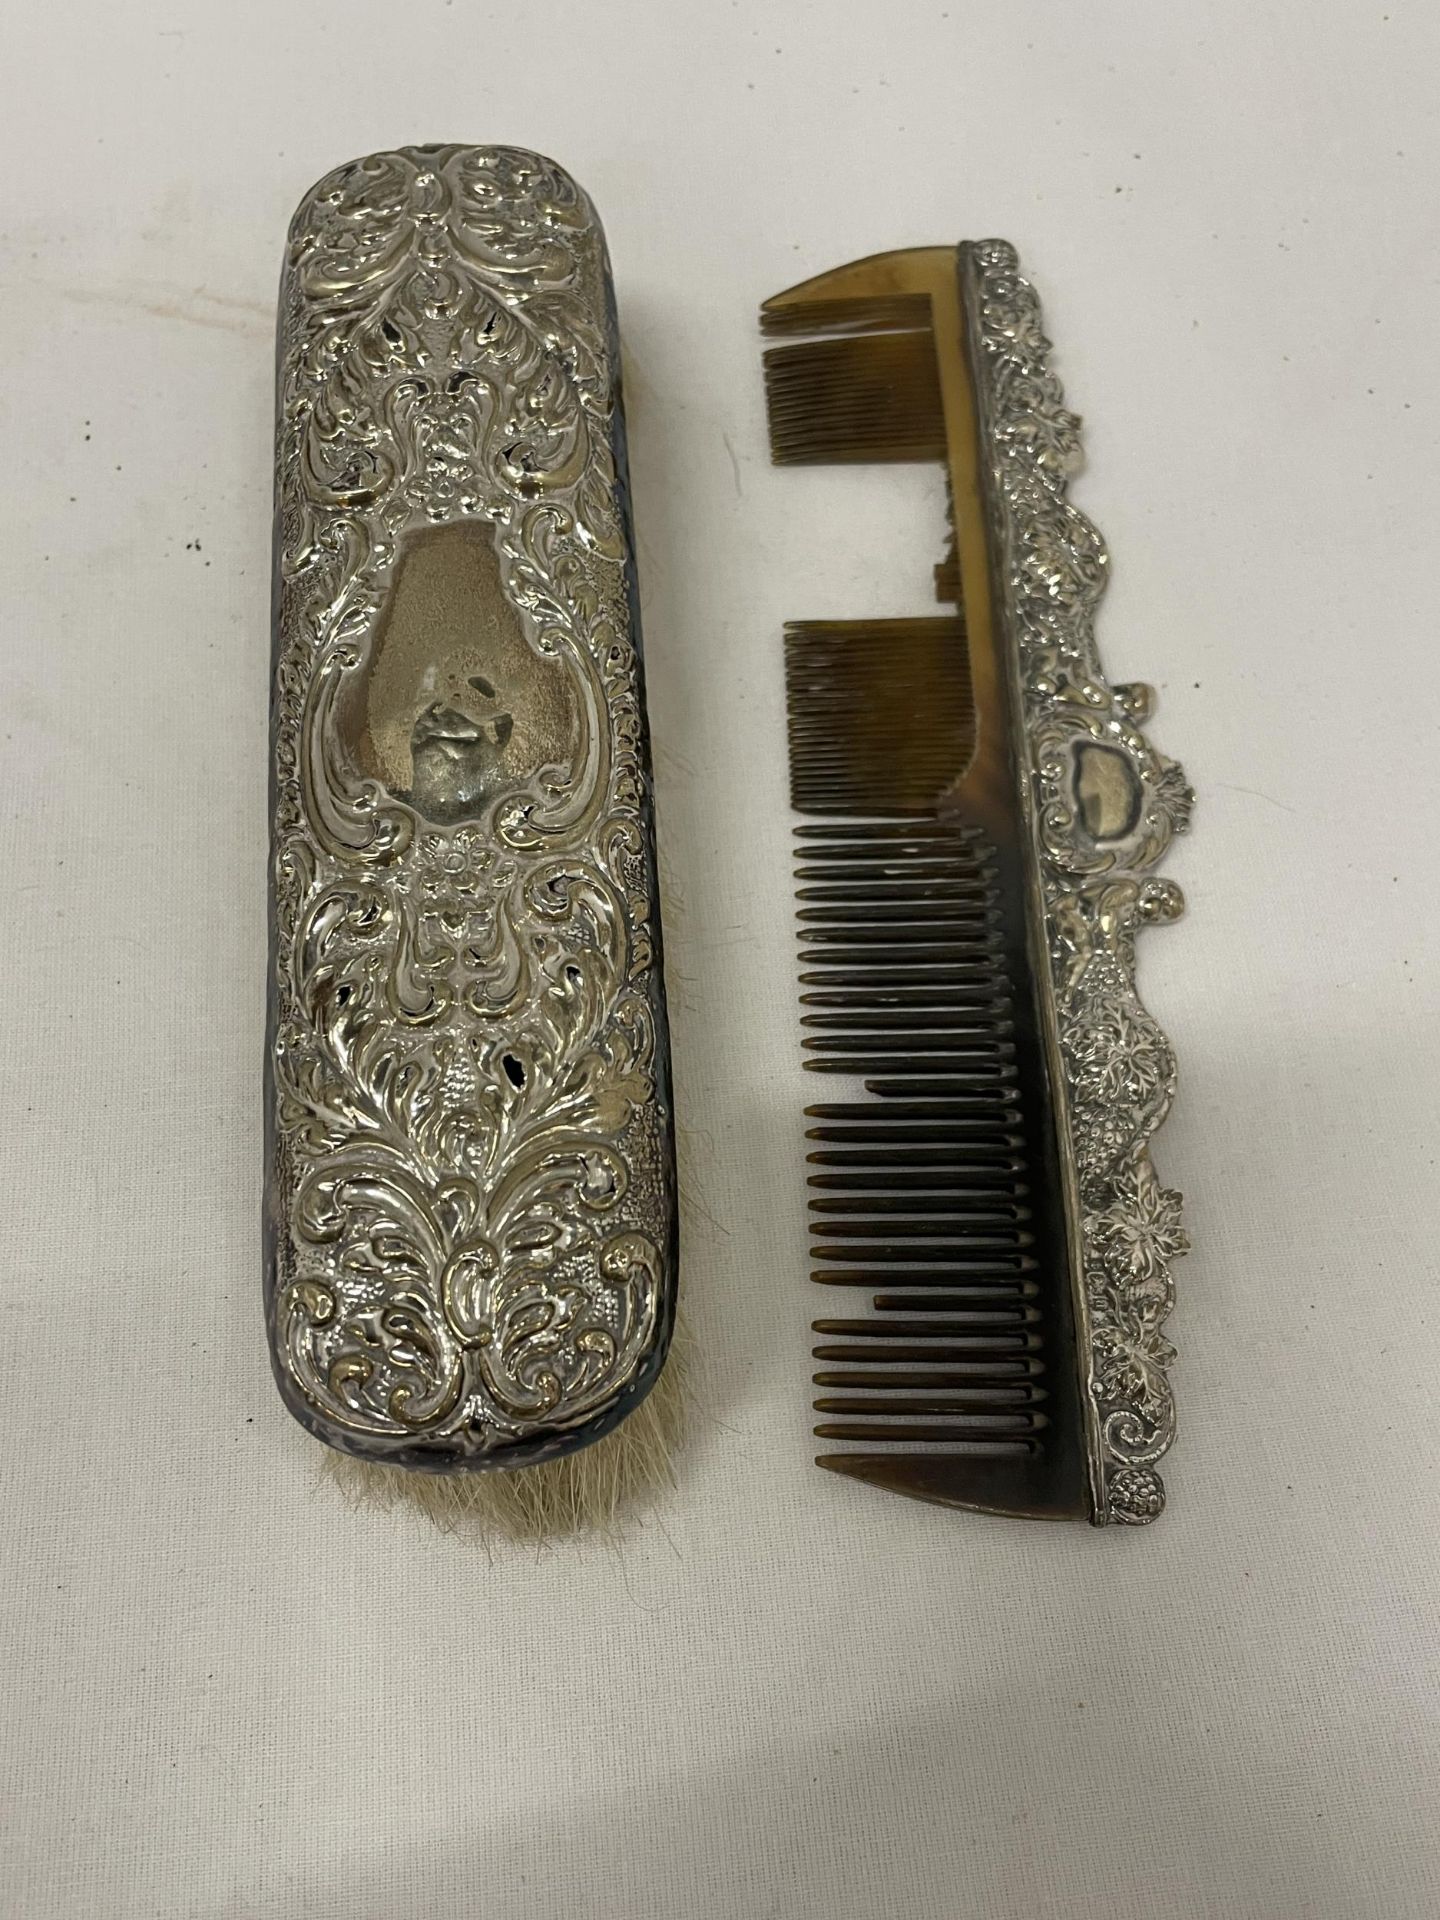 A HALLMARKED BIRMINGHAM SILVER BACKED SET OF TWO BRUSHES, A MIRROR AND COMB - Image 3 of 4